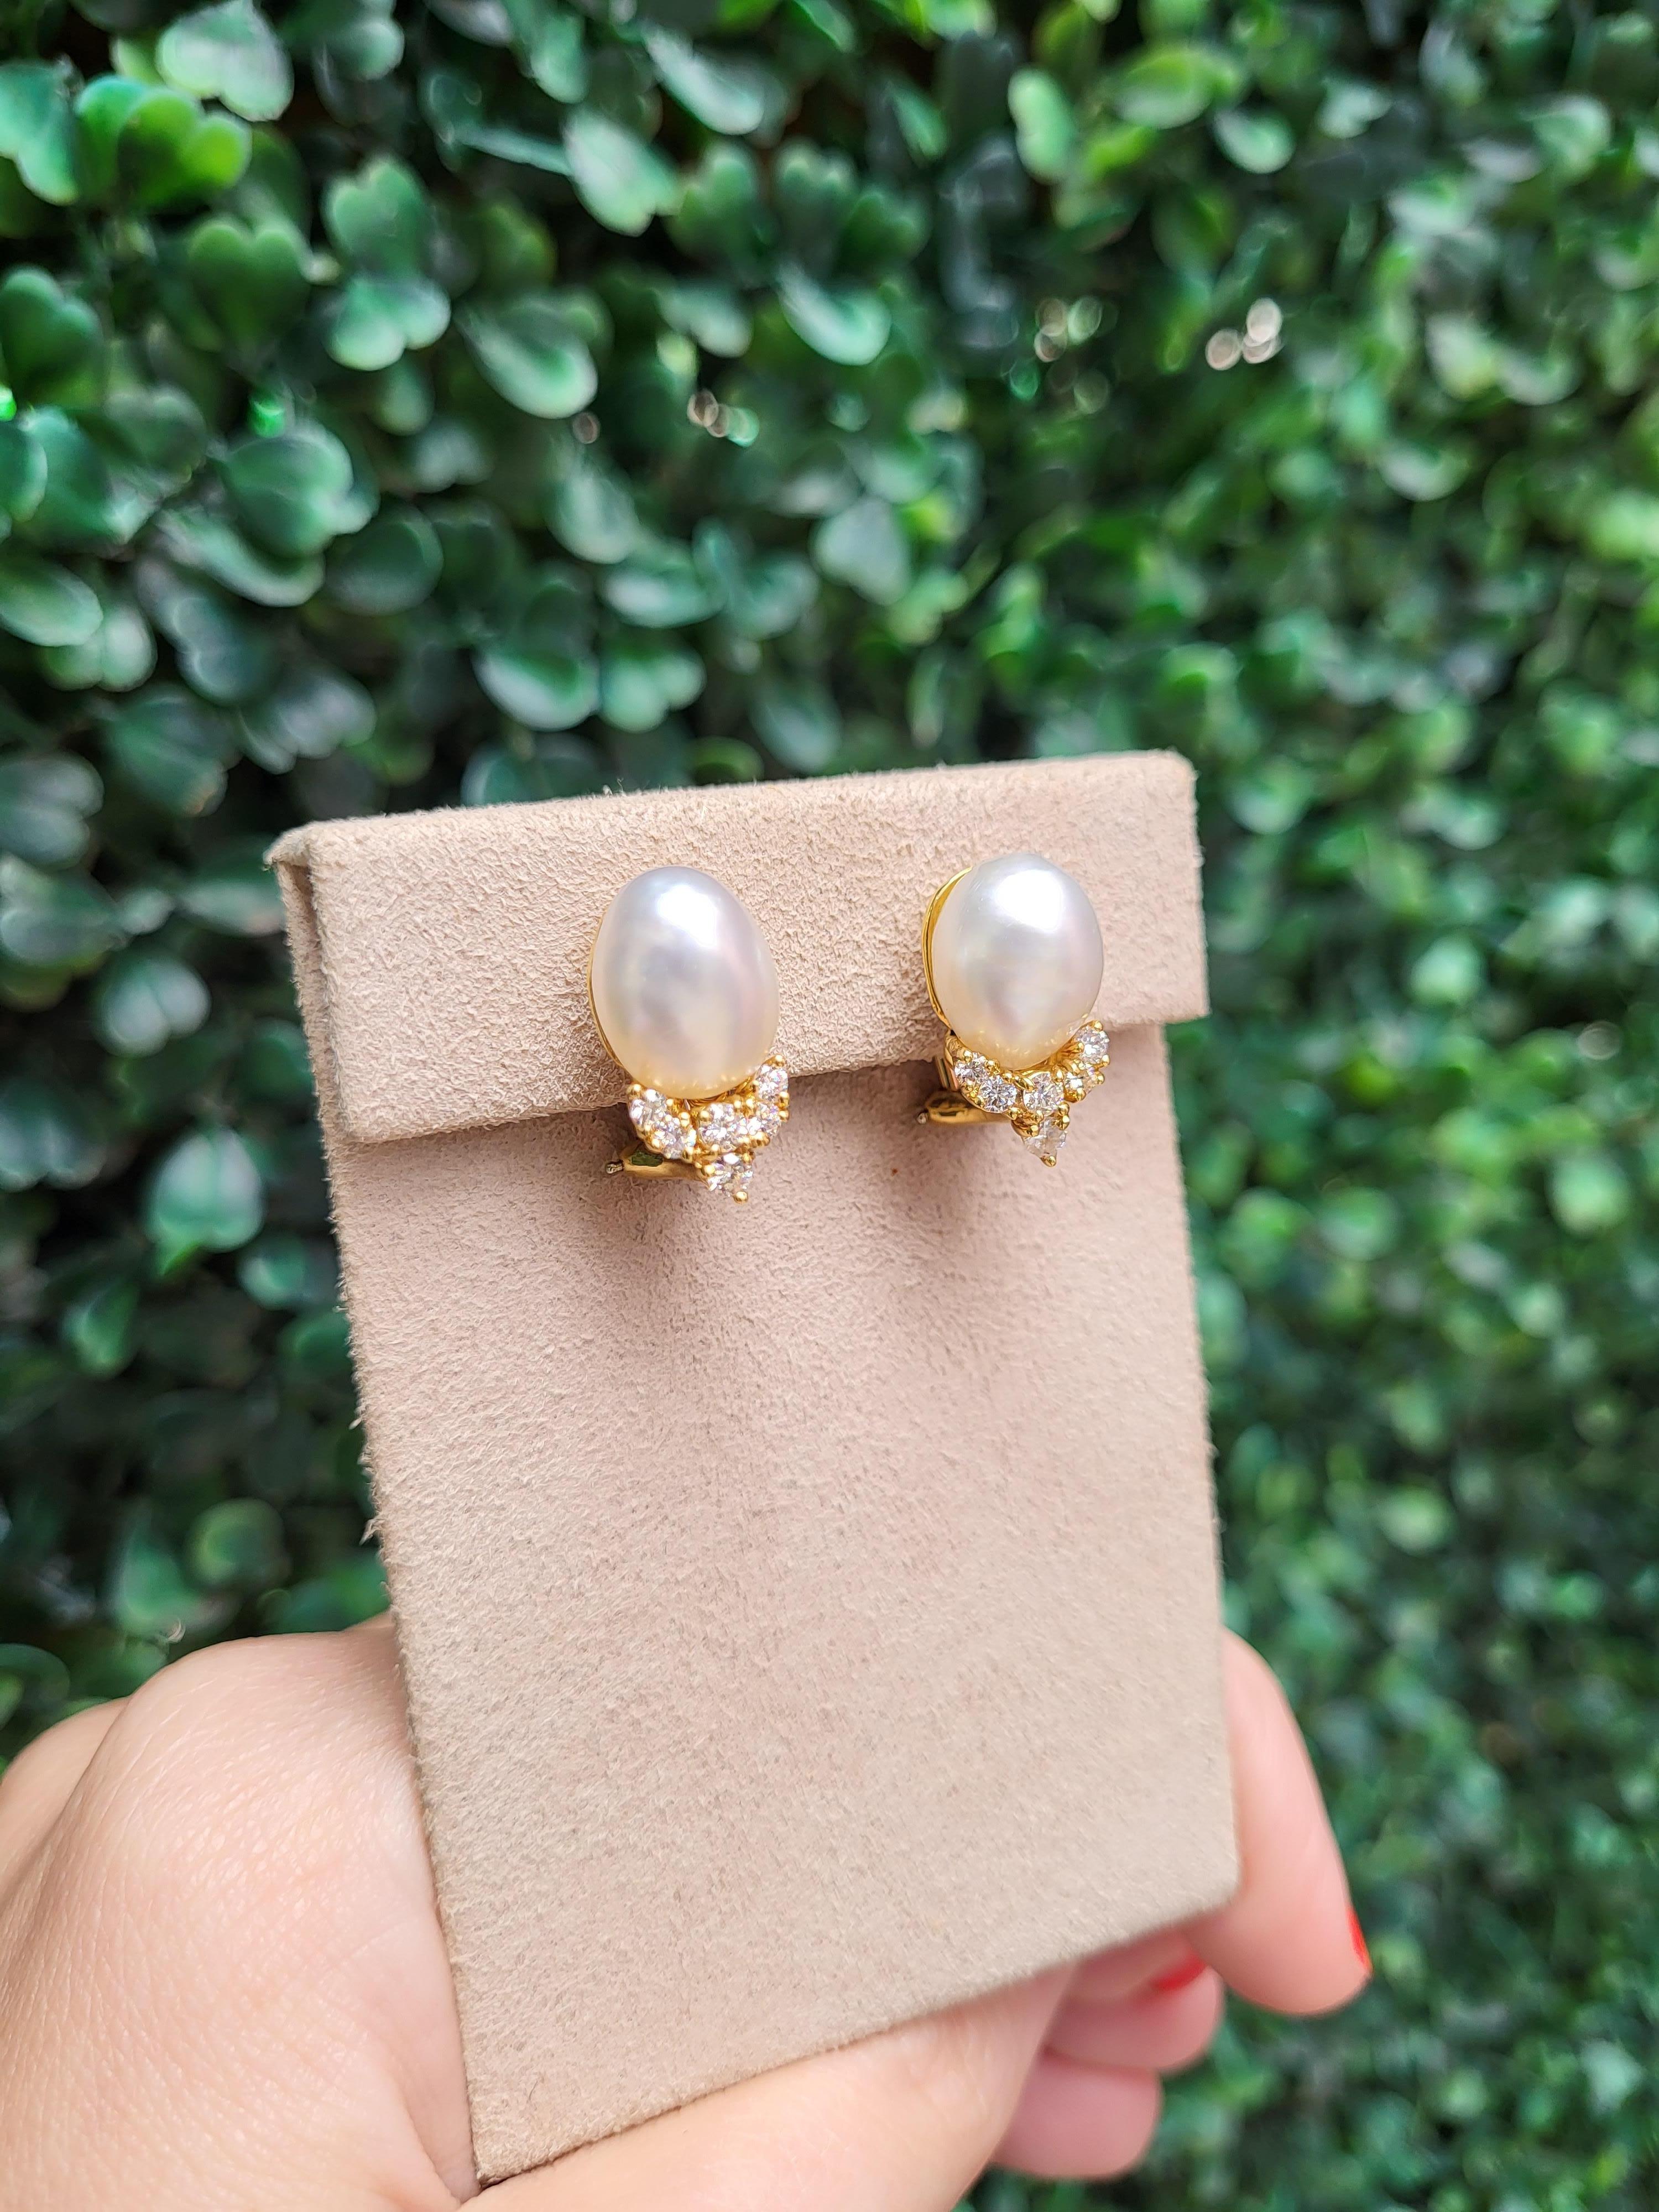 Henry Dunay Baroque Cultured Pearl & Diamond Earrings For Sale 7